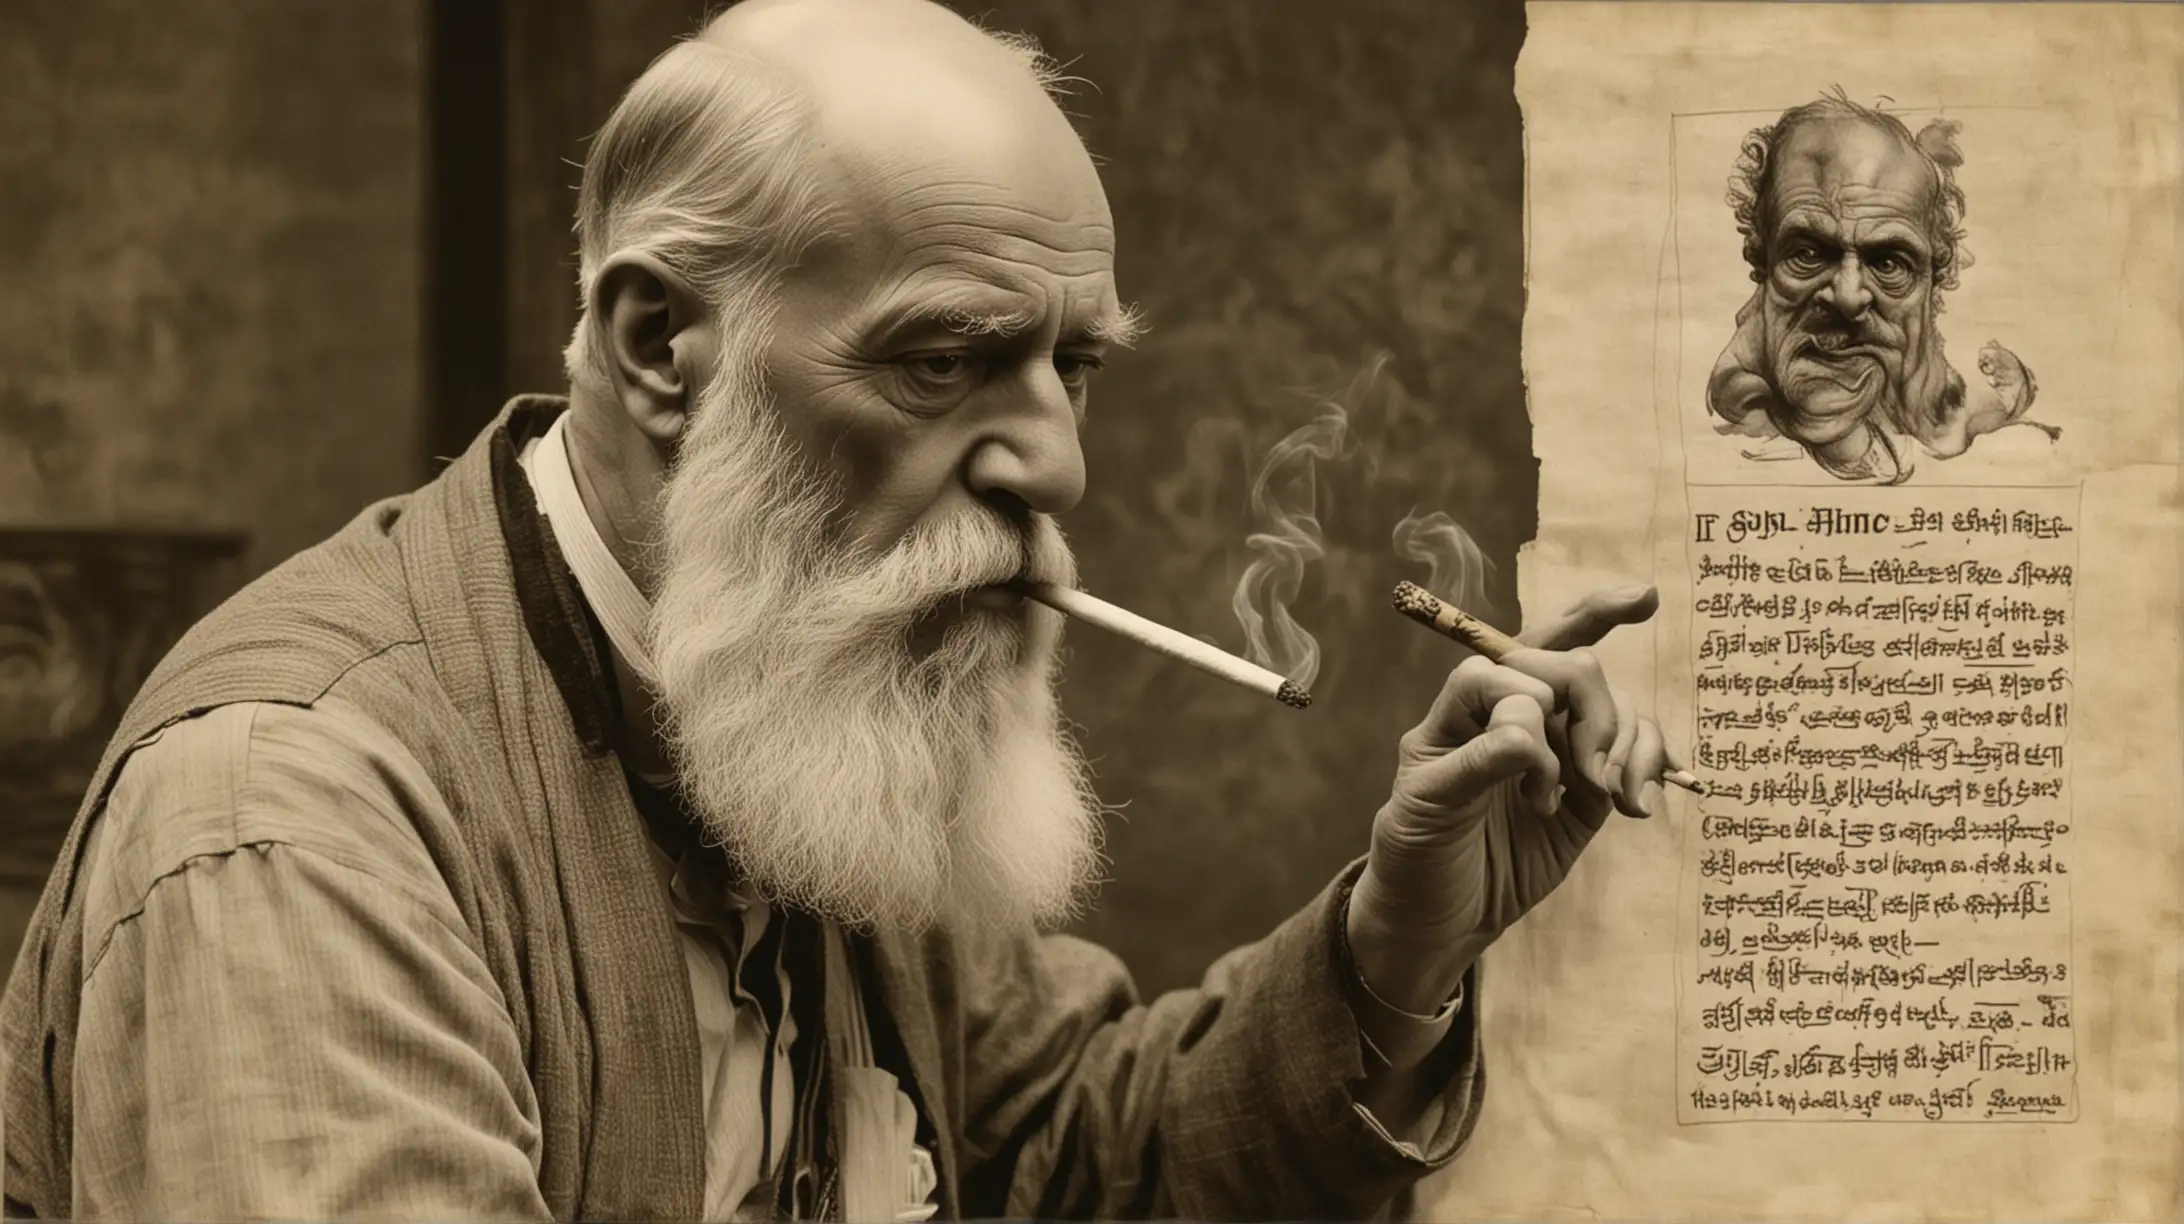 Year 1917. Sigmund Freud  smokes a cigarette and Draw  the blind Oedipus on a piece of paper. Tre blind Oedipus cties. Styled like an old hand-colored silent film.